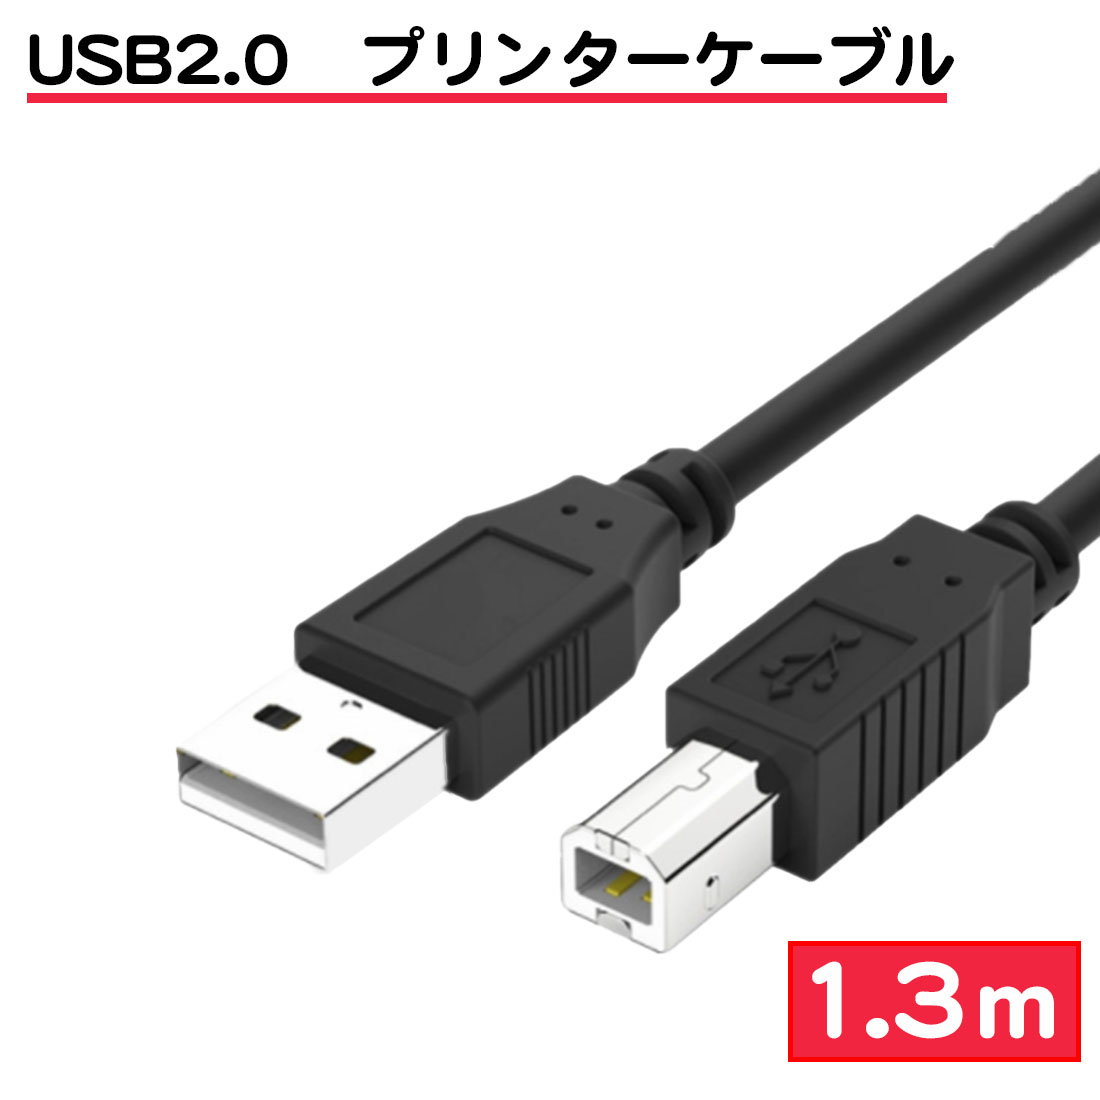 1.3m printer cable usb2.0 a-b type ab type all-purpose Canon Brother Epson printing connection printer scanner FAX cable usb cable free shipping 